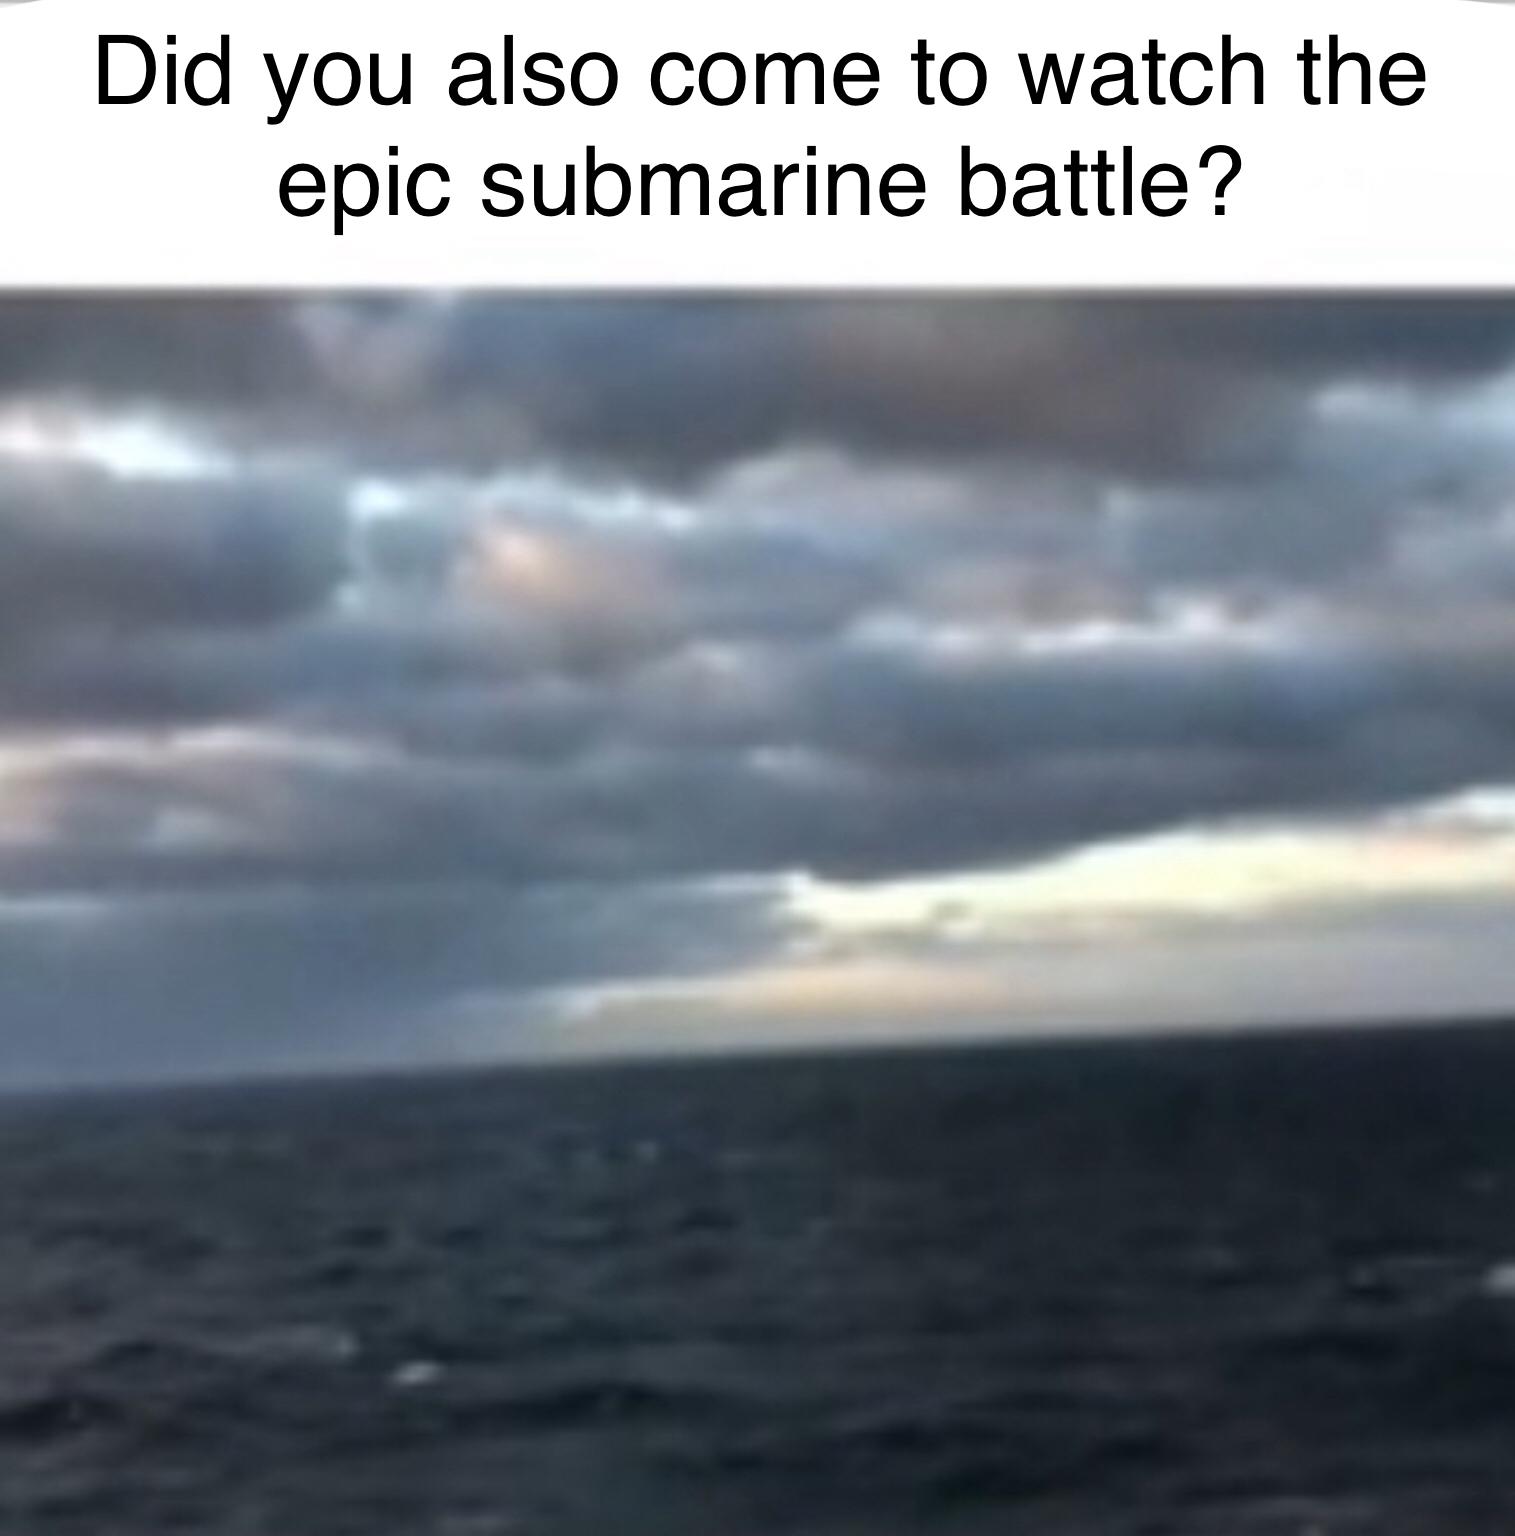 dank memes - funny memes - epic records - Did you also come to watch the epic submarine battle?